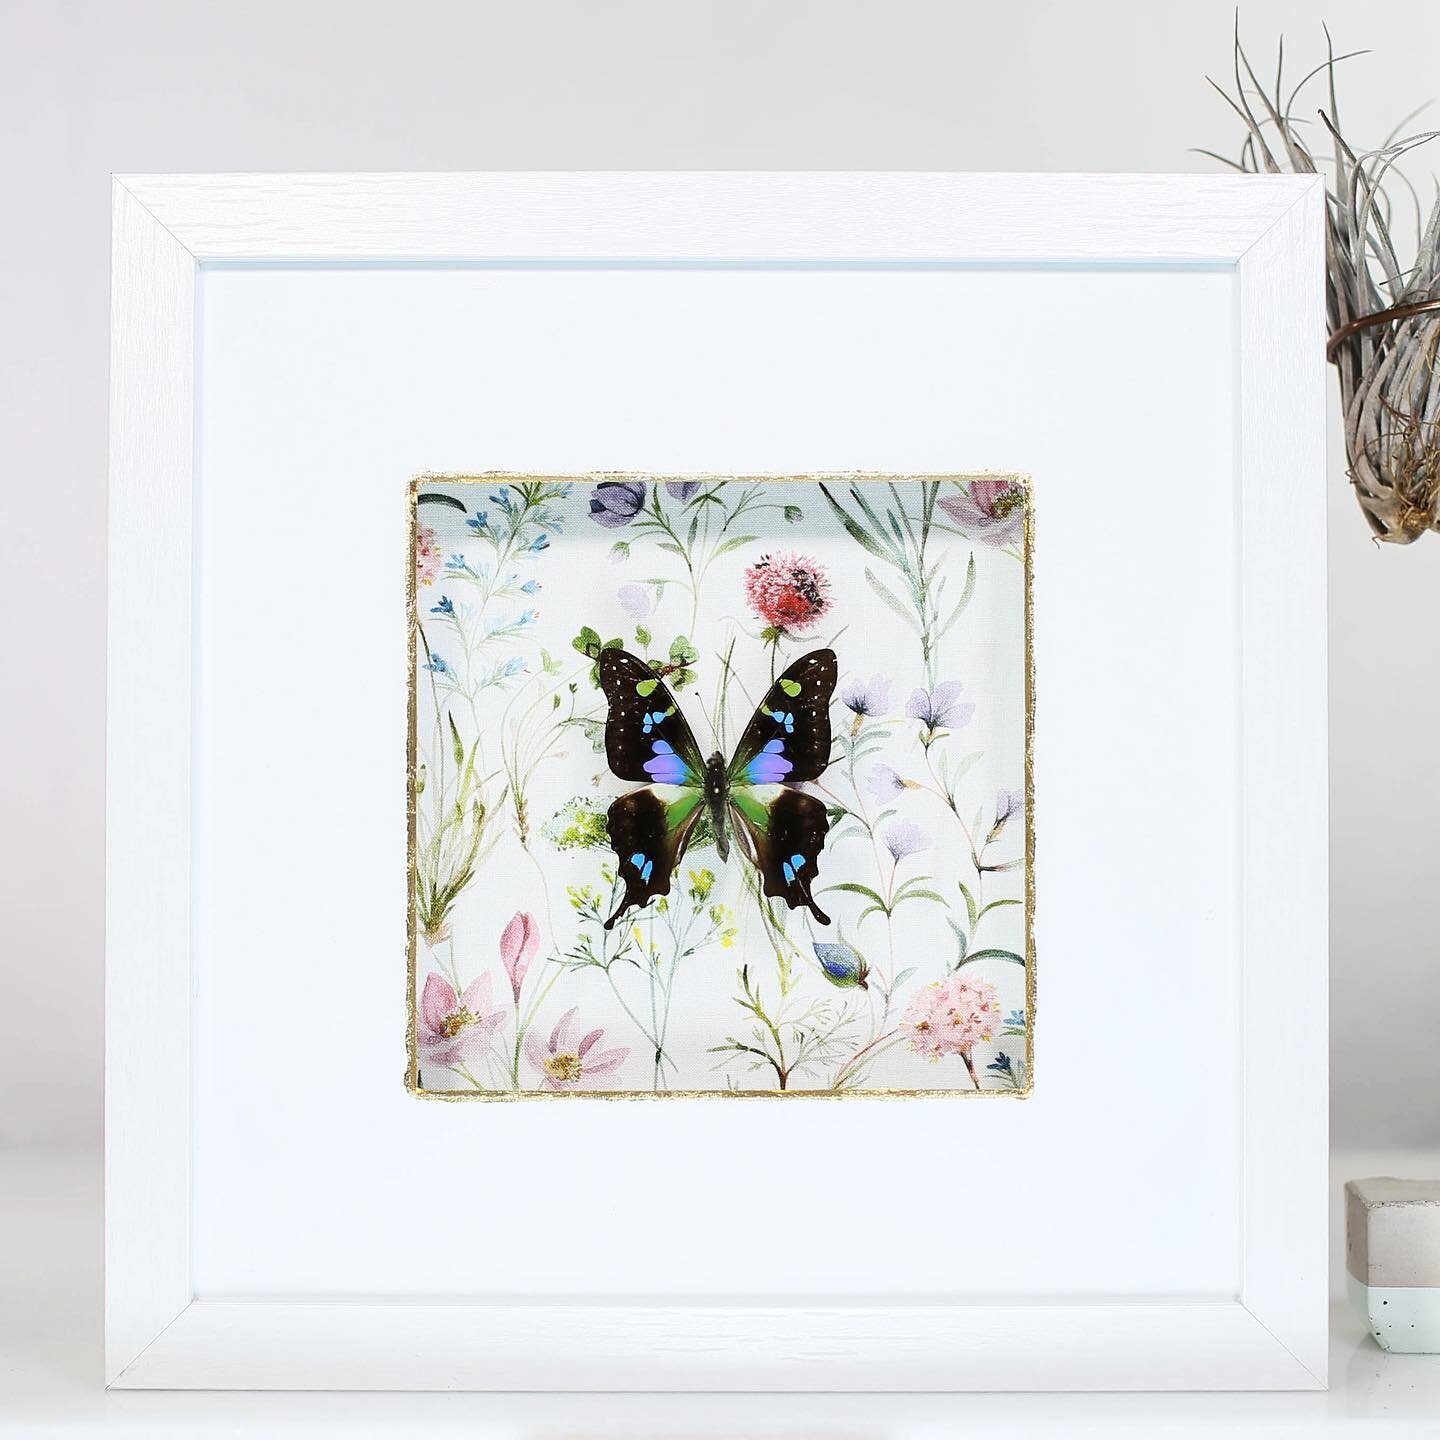 Another new piece now on the website at
Buginthebox.net 
This beautiful Swallowtail butterfly is paired beautifully with a floral background! 

🌸🦋❤️🦋❤️🦋🌸

#butterfly #butterflies #butterflies
#butterfliesofinstagram #butterflys #butterfly
#homed